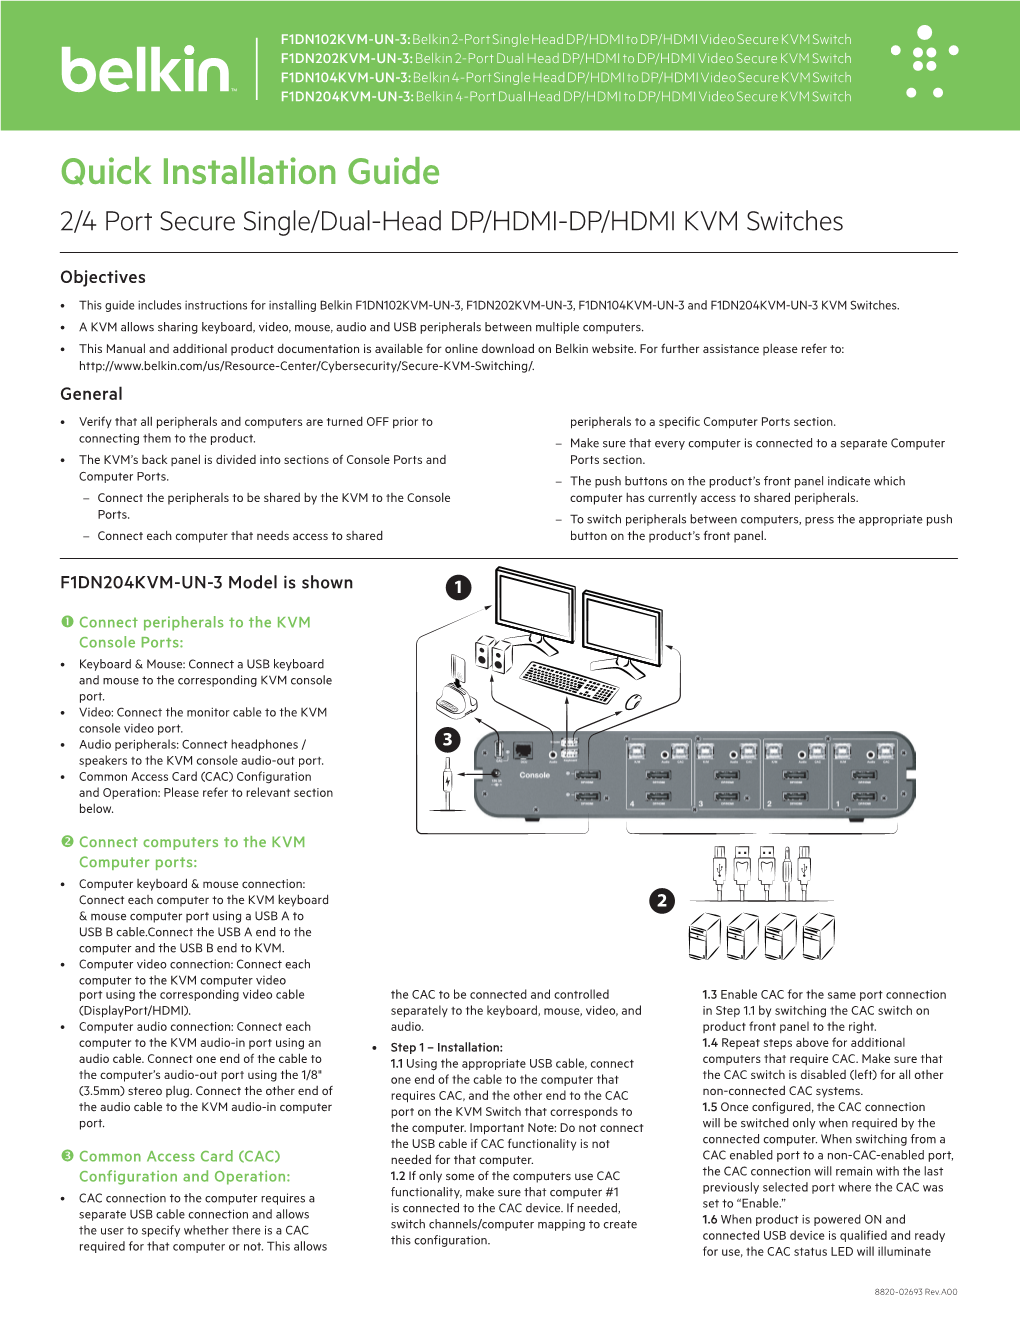 Quick Installation Guide 2/4 Port Secure Single/Dual-Head DP/HDMI-DP/HDMI KVM Switches